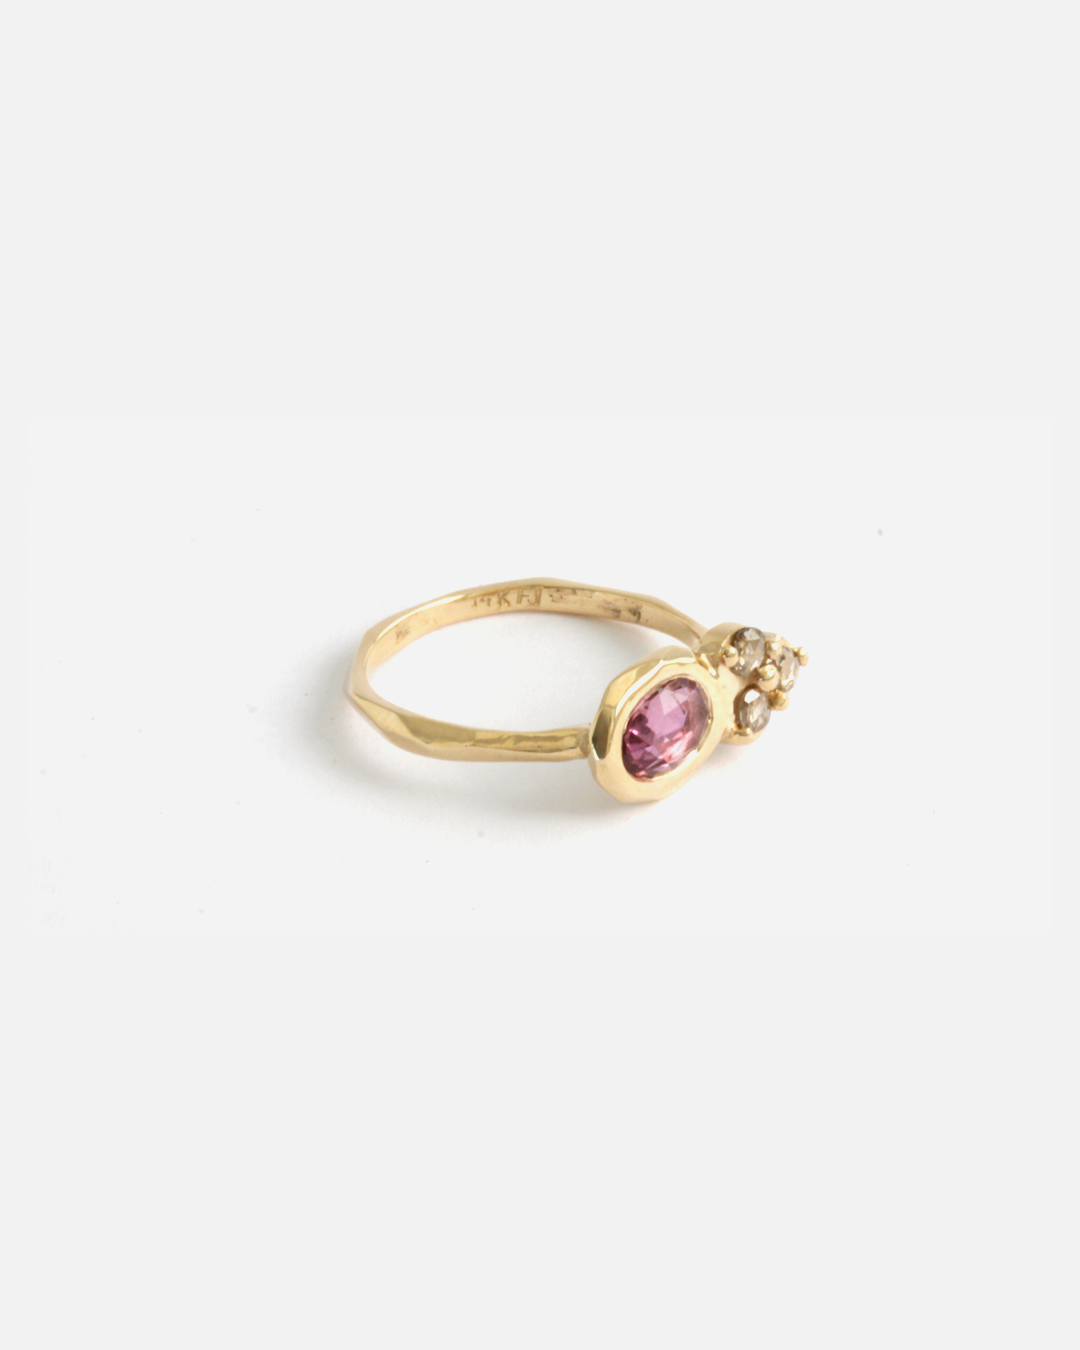 Pebble Ring / Rose Cut Sapphire By Hiroyo